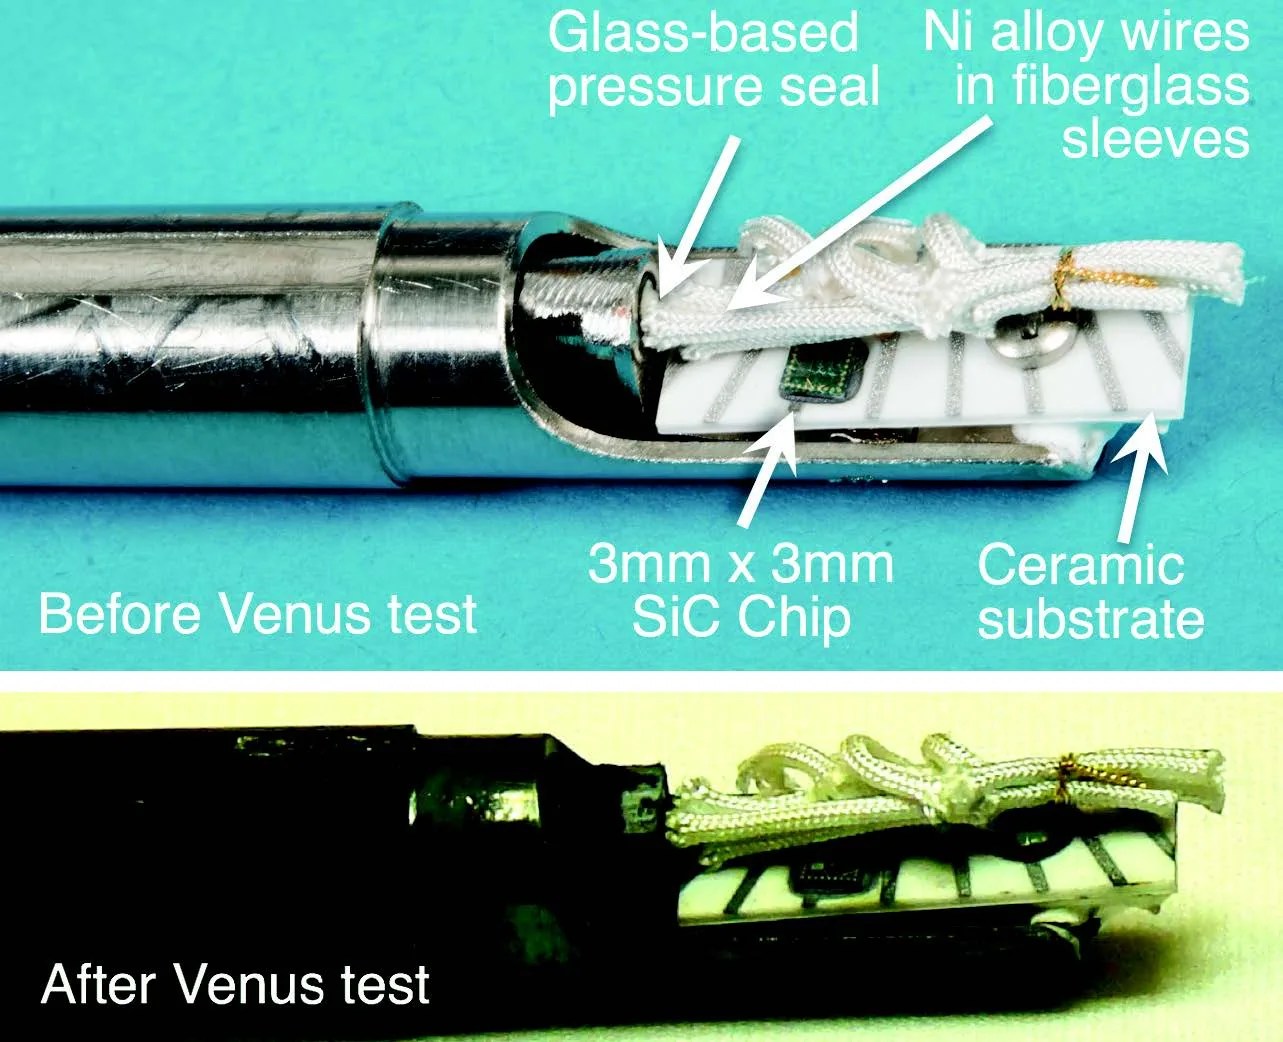 Photo of high temperature electronics before and after testing in Venus surface conditions